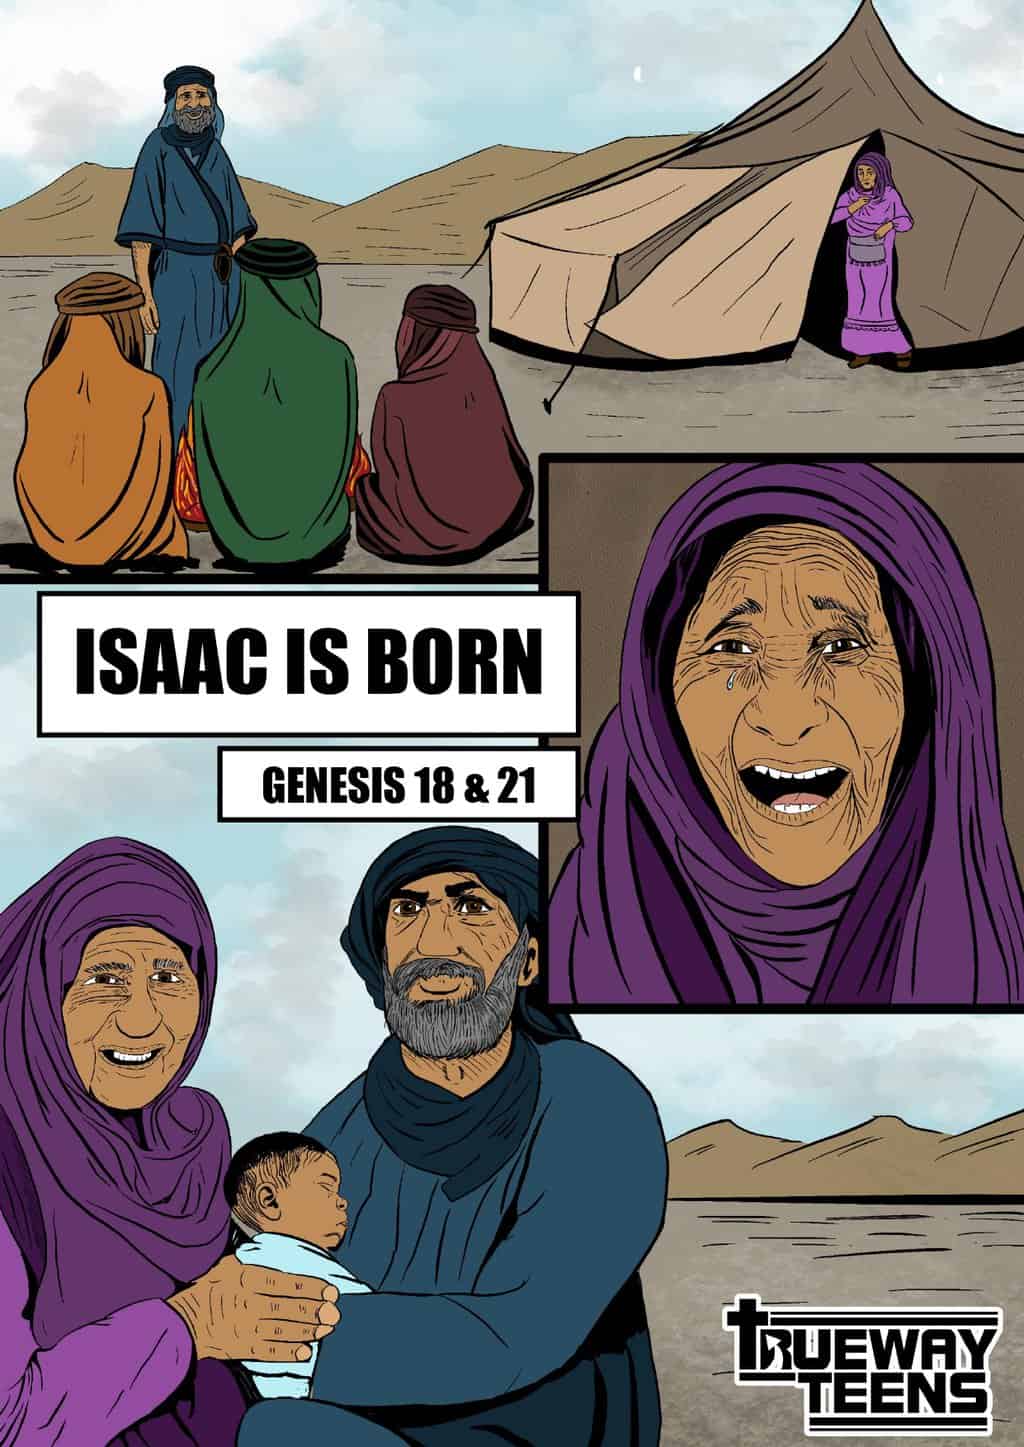 isaac-is-born-genesis-18-21-bible-lesson-for-teens-trueway-kids